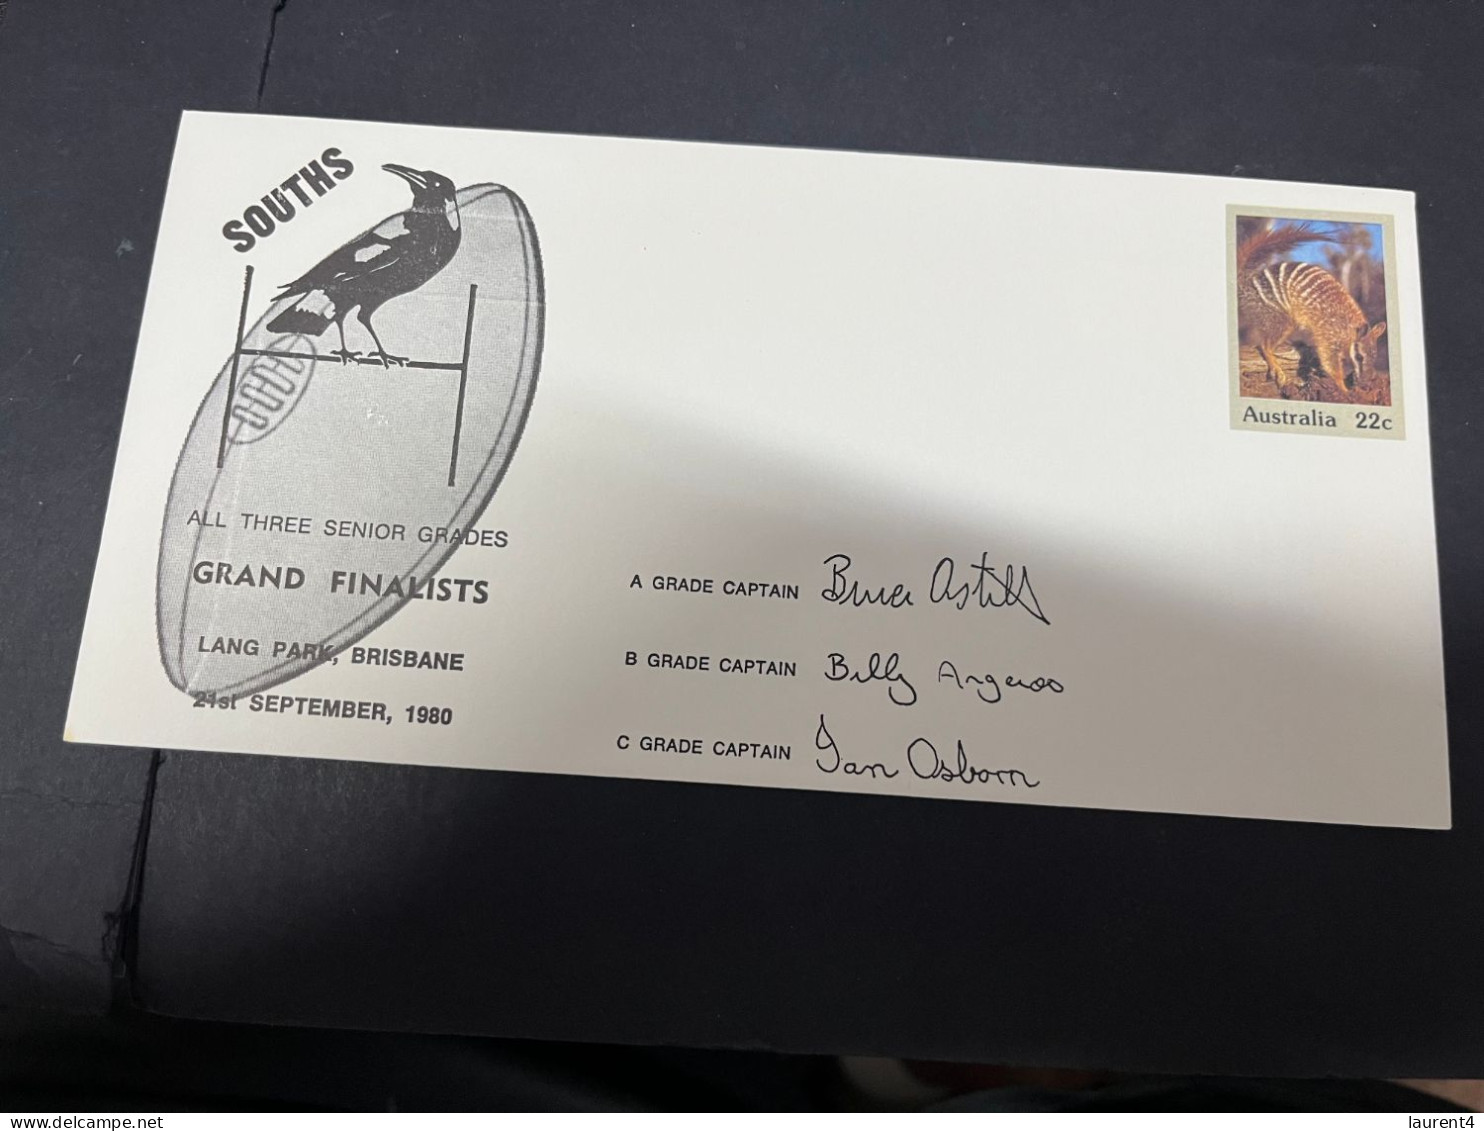 30-4-2023 (3 Z 29) Australia FDC (1 Covers) 1980 - OZ Football - South (magpies) Grand Finalists (signed - Numbat) - Premiers Jours (FDC)